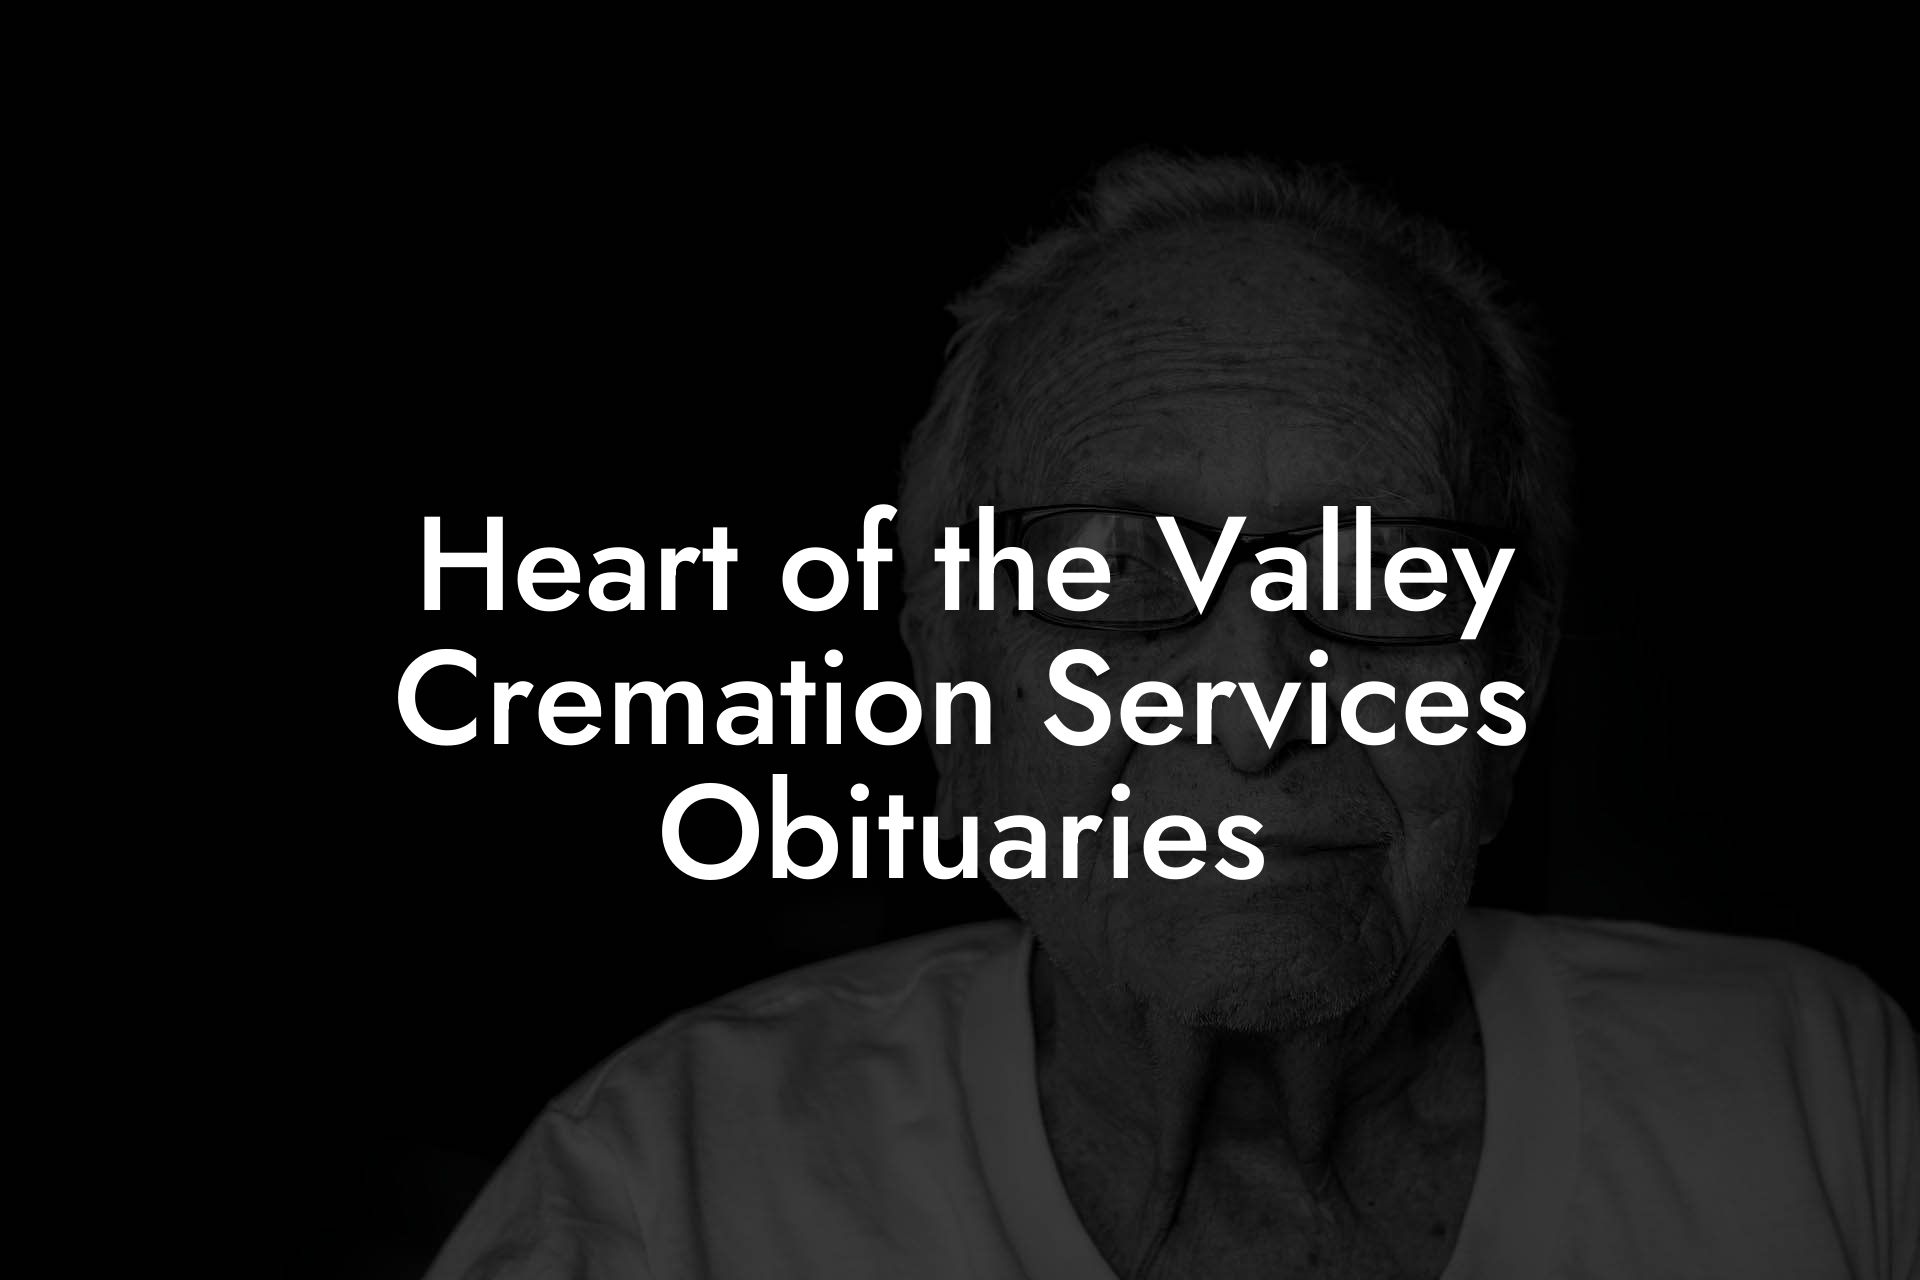 Heart of the Valley Cremation Services Obituaries